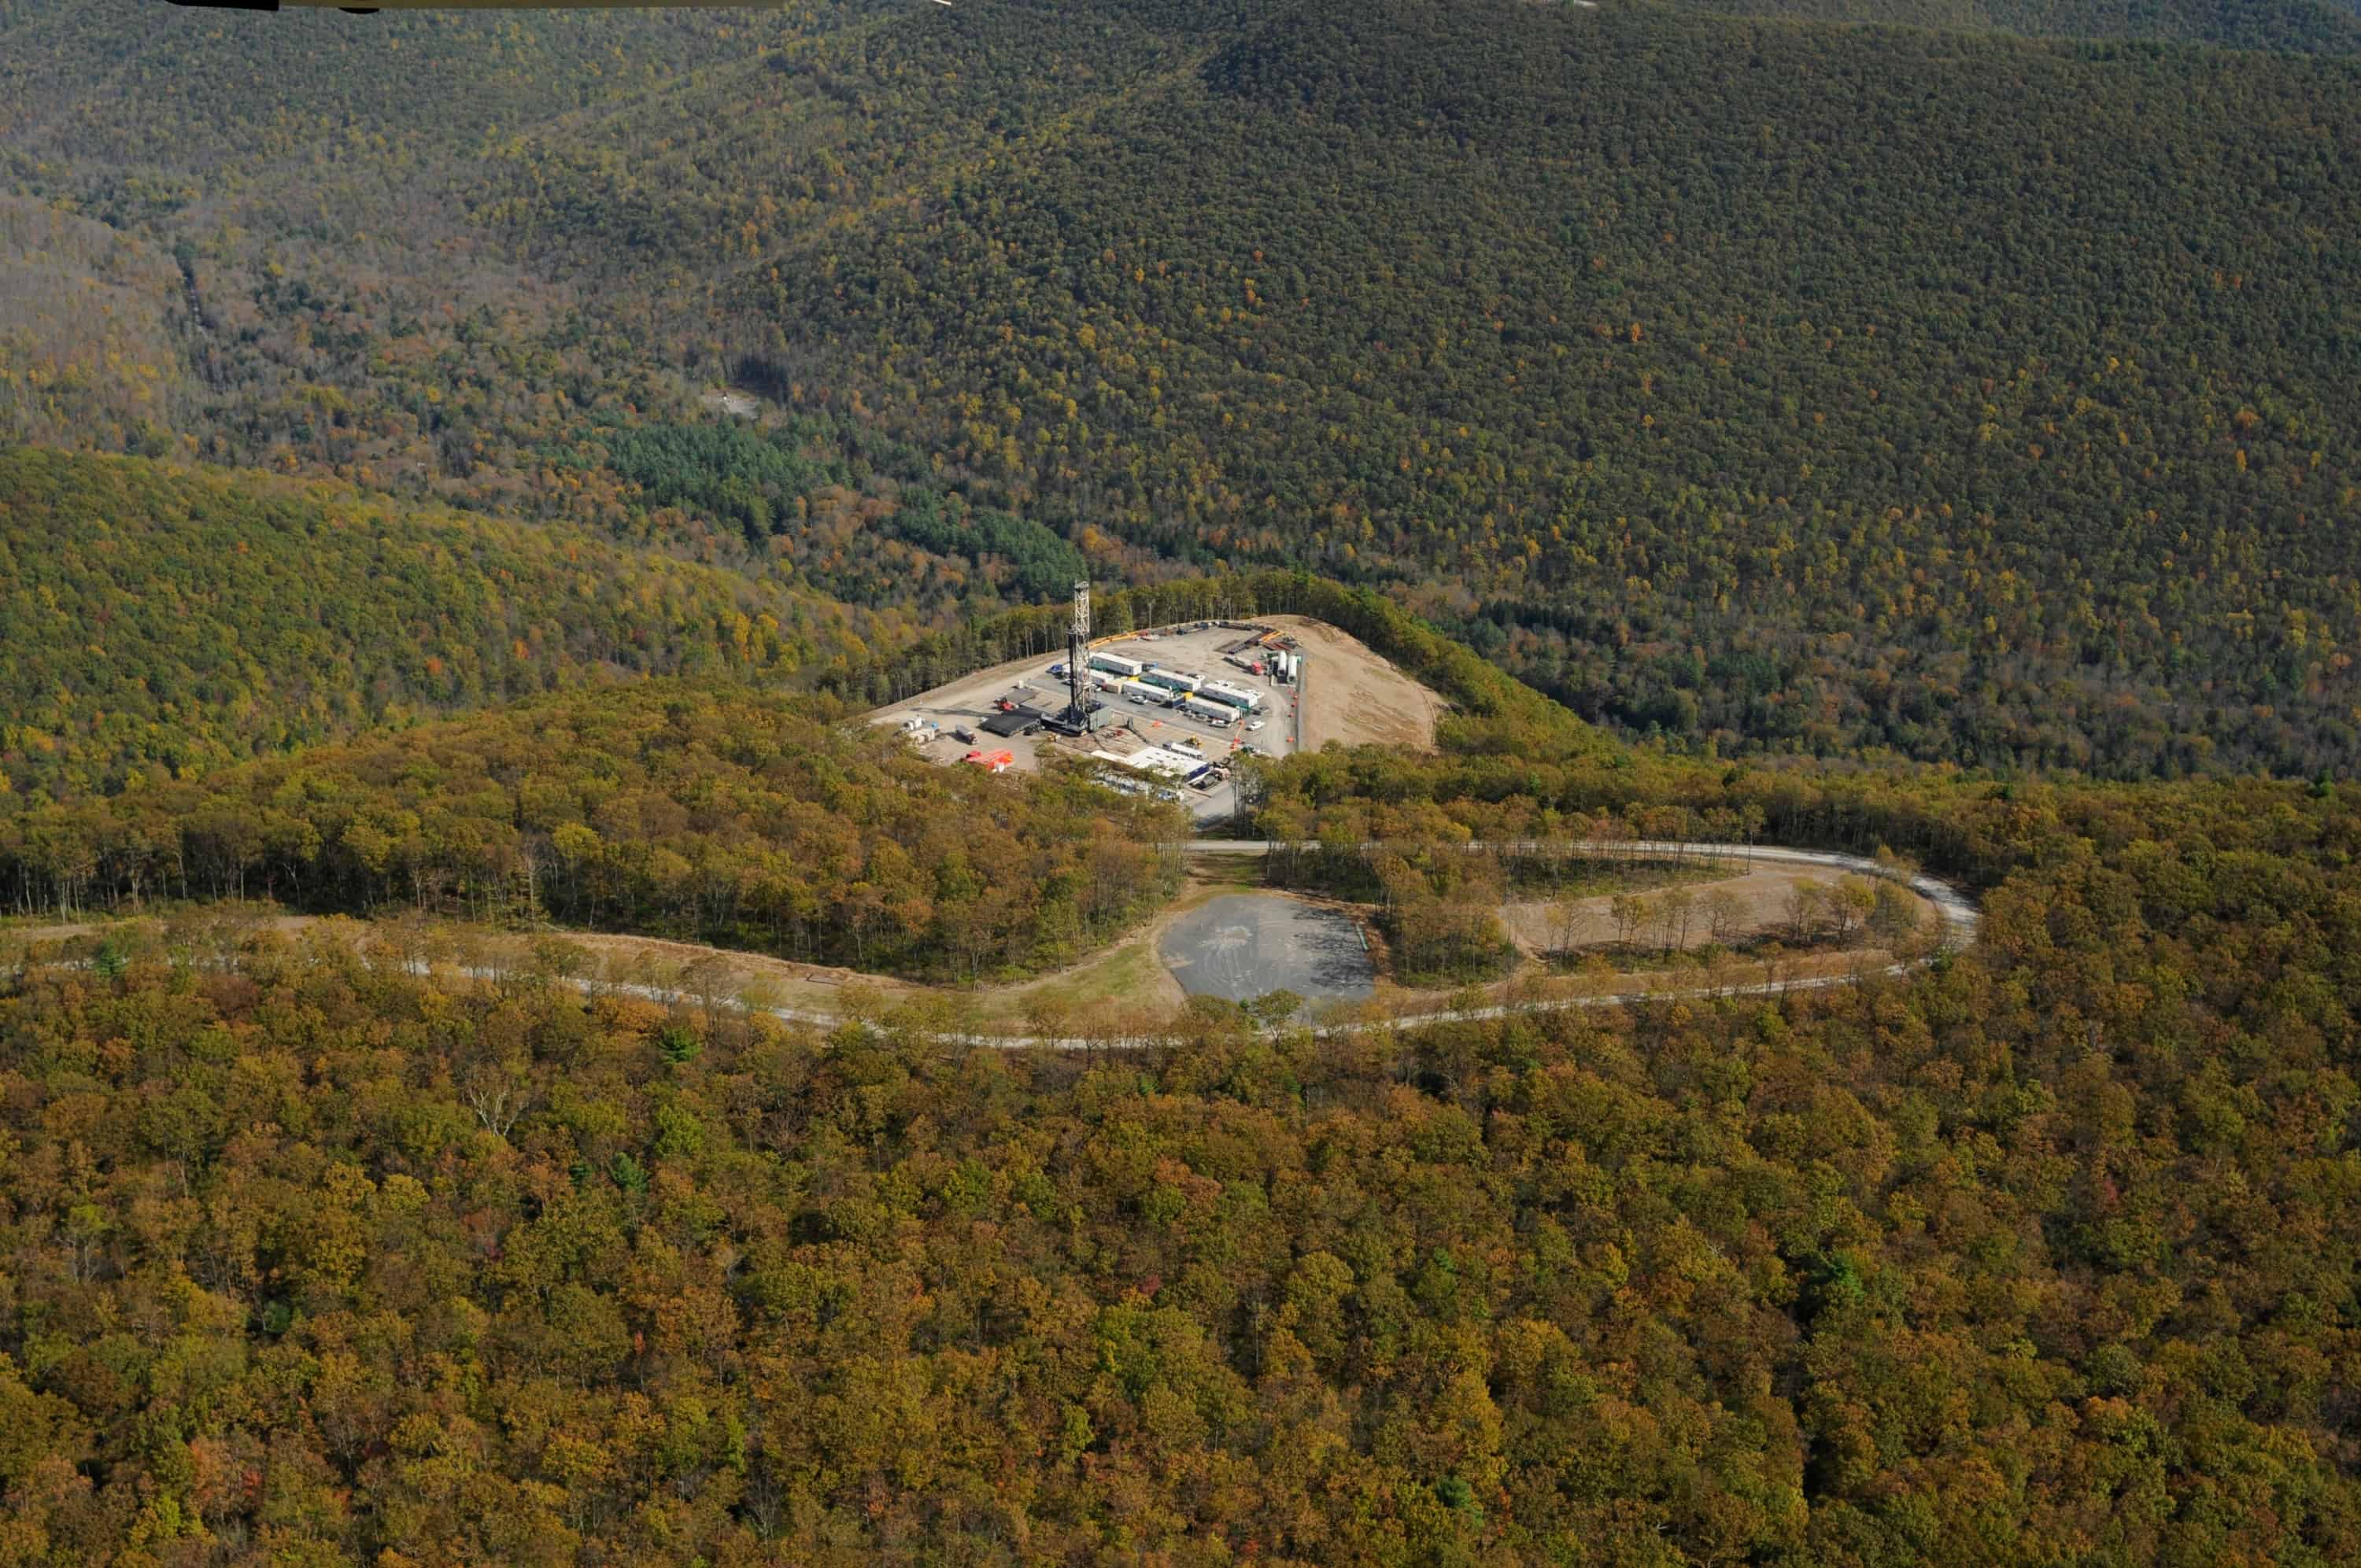 EXAMPLE OF A FRACKING INDUSTRIAL SITE USED FOR SHALE NATURAL GAS ENERGY DEVELOPMENT (SGD) IN RURAL PENNSYLVANIA. PHOTO CREDIT: PETE STERN/FRACTRACKER ALLIANCE